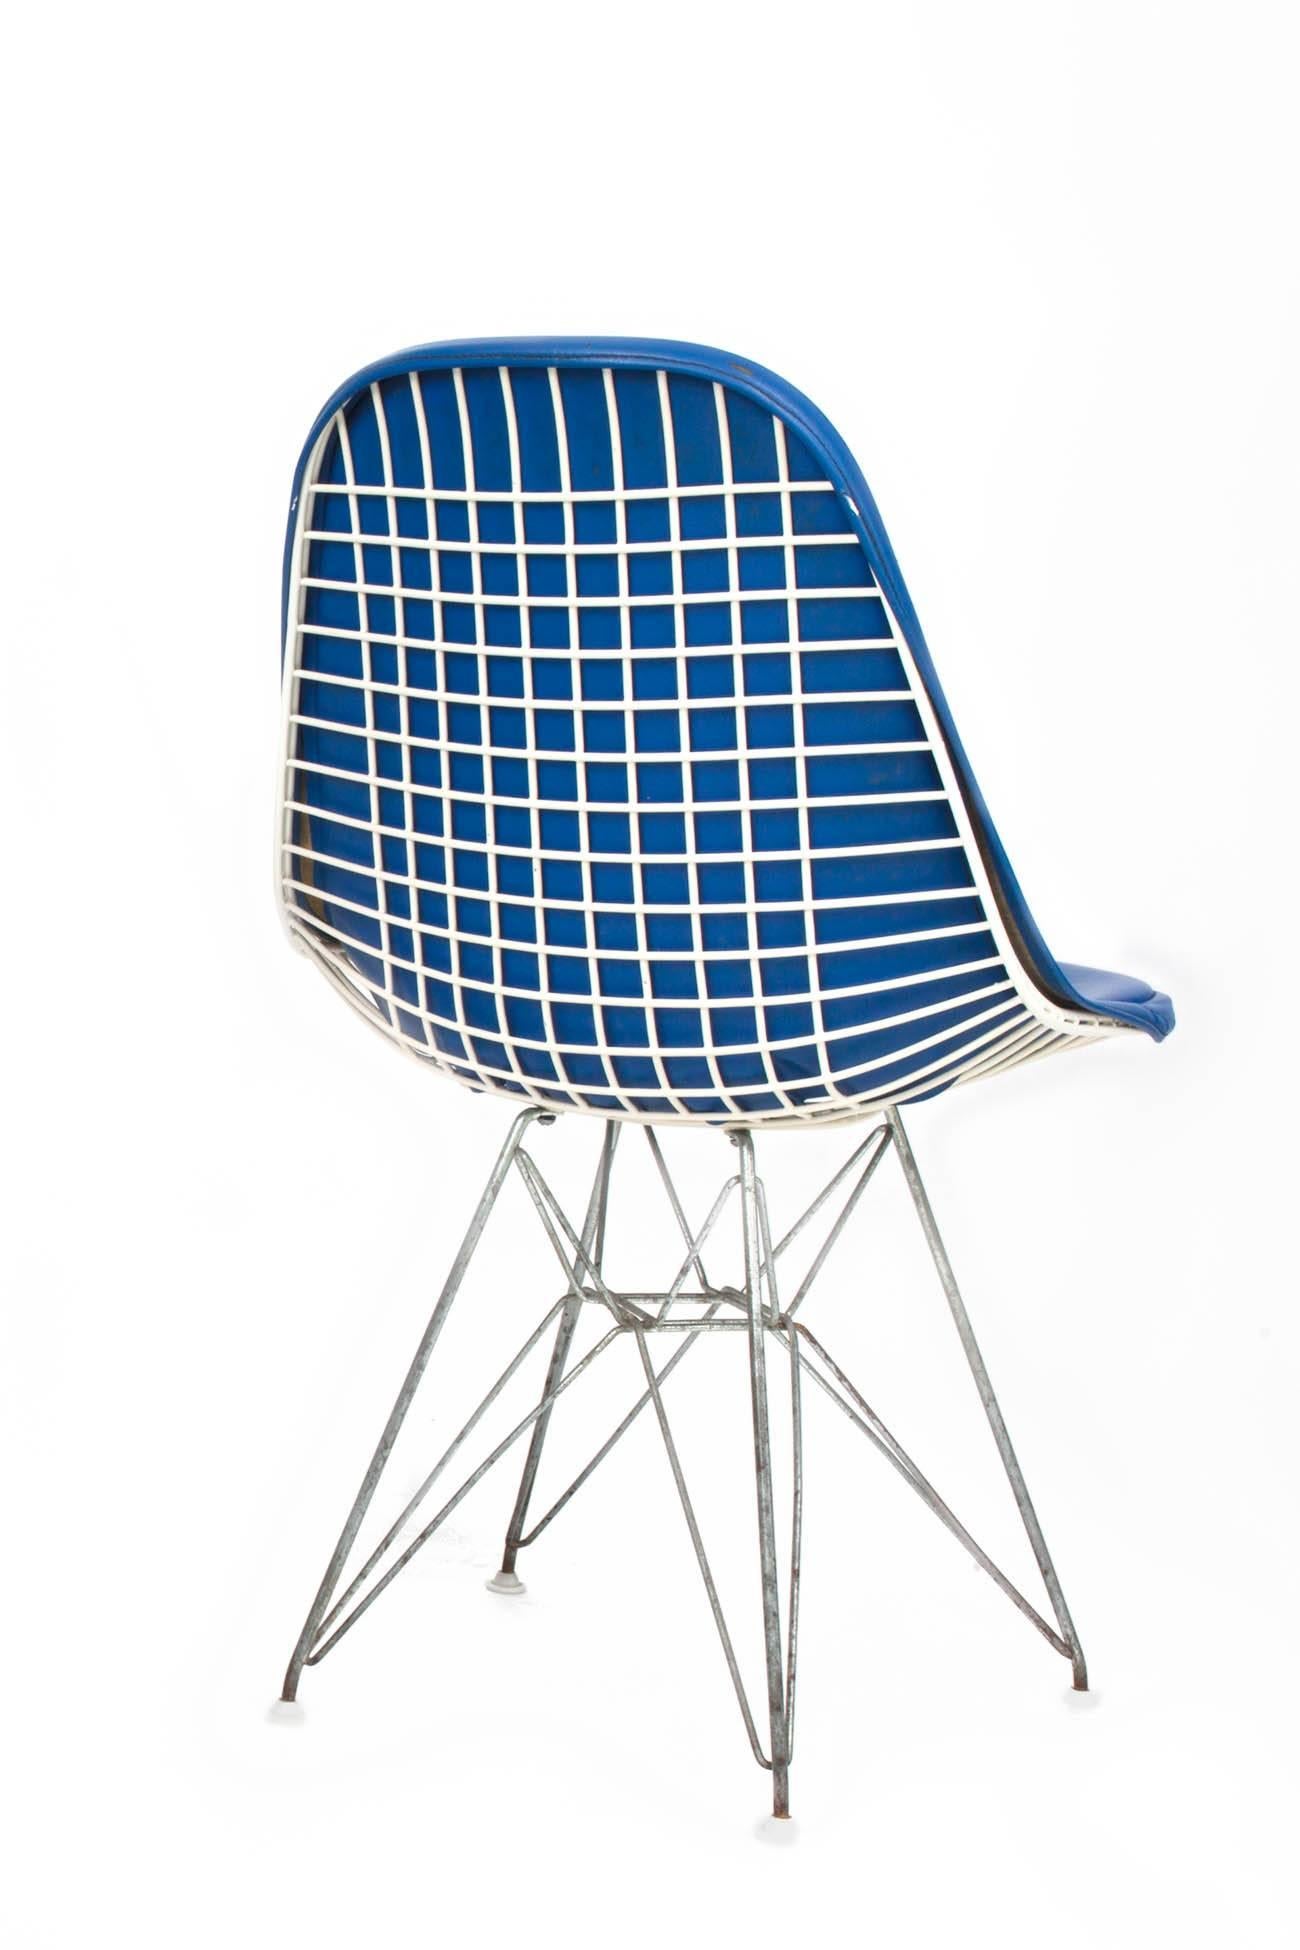 American Original Set of 4 Eames DKR-1 Dining Chairs in Blue Vinyl and White Steel, 1951 For Sale